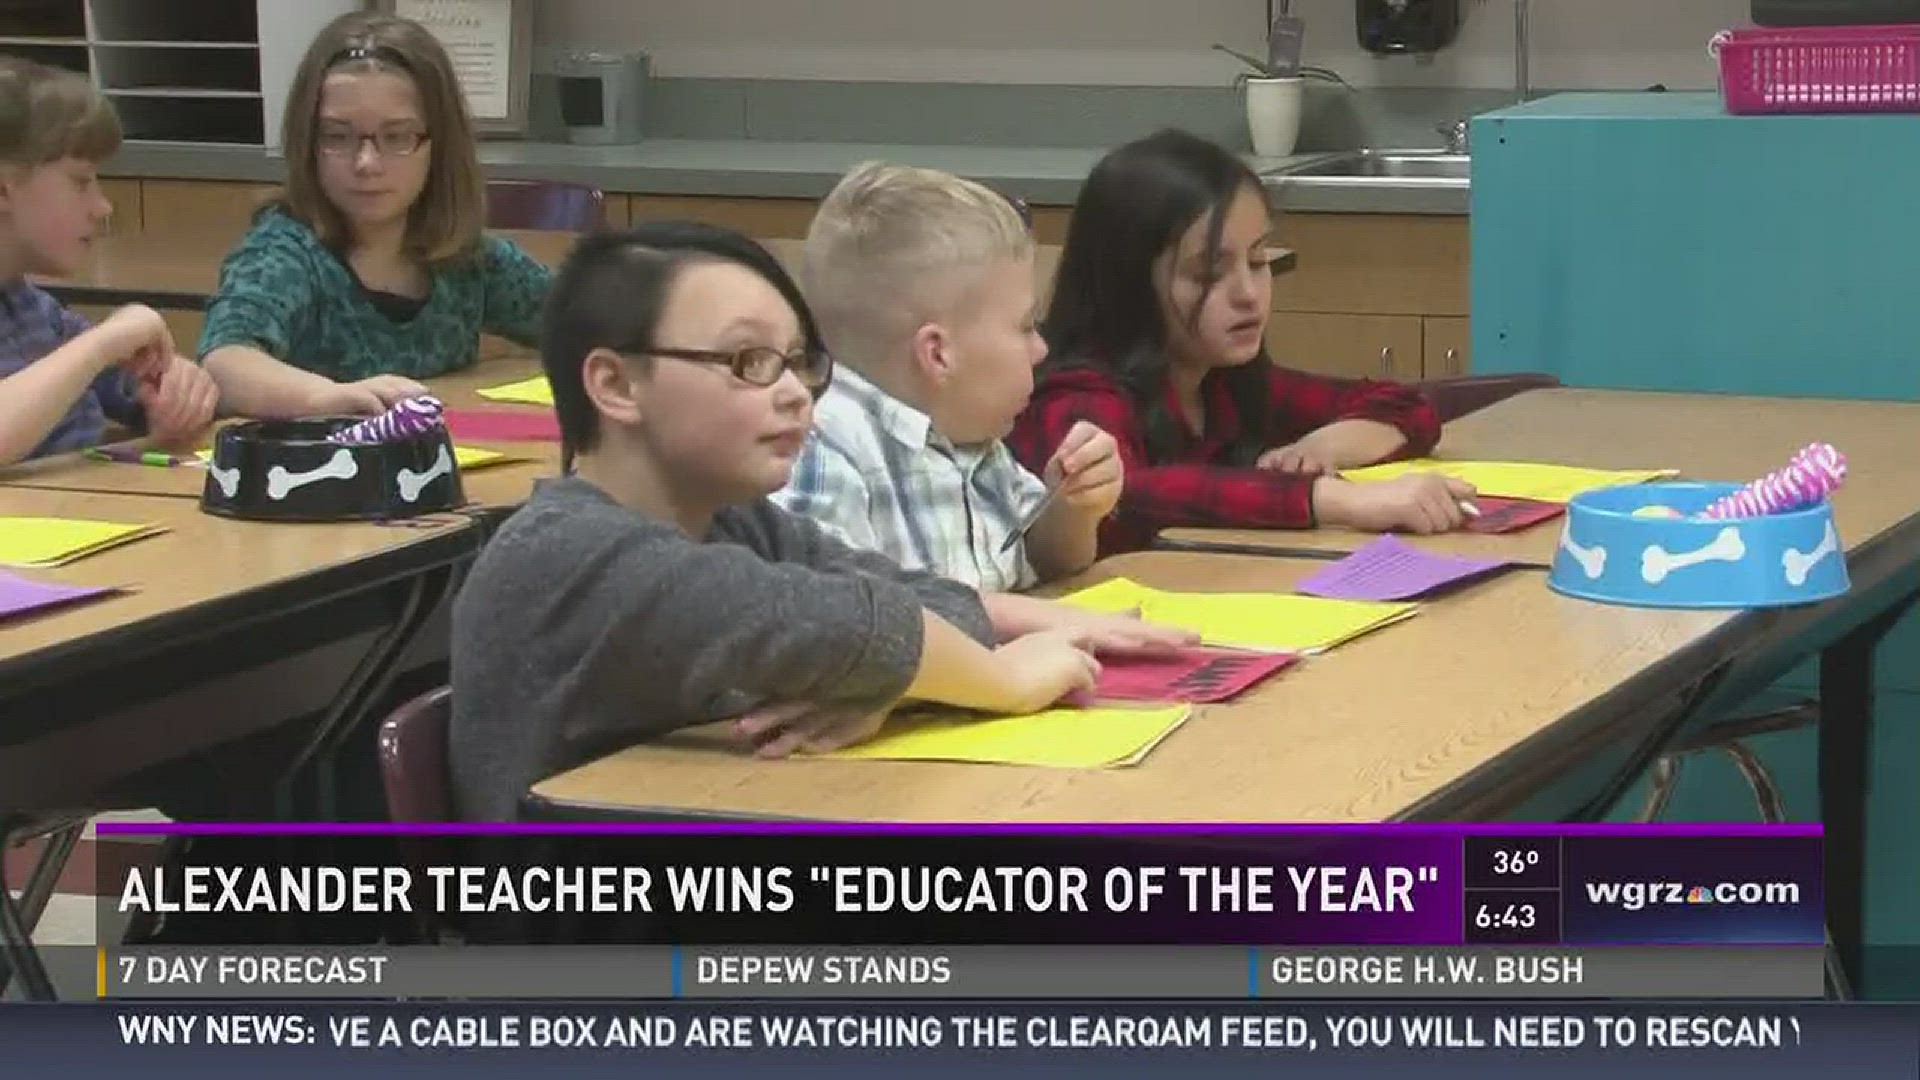 Daybreak's Heather Ly reports on a 5th grade teacher from Alexander who was awarded the "Educator of the Year" award.